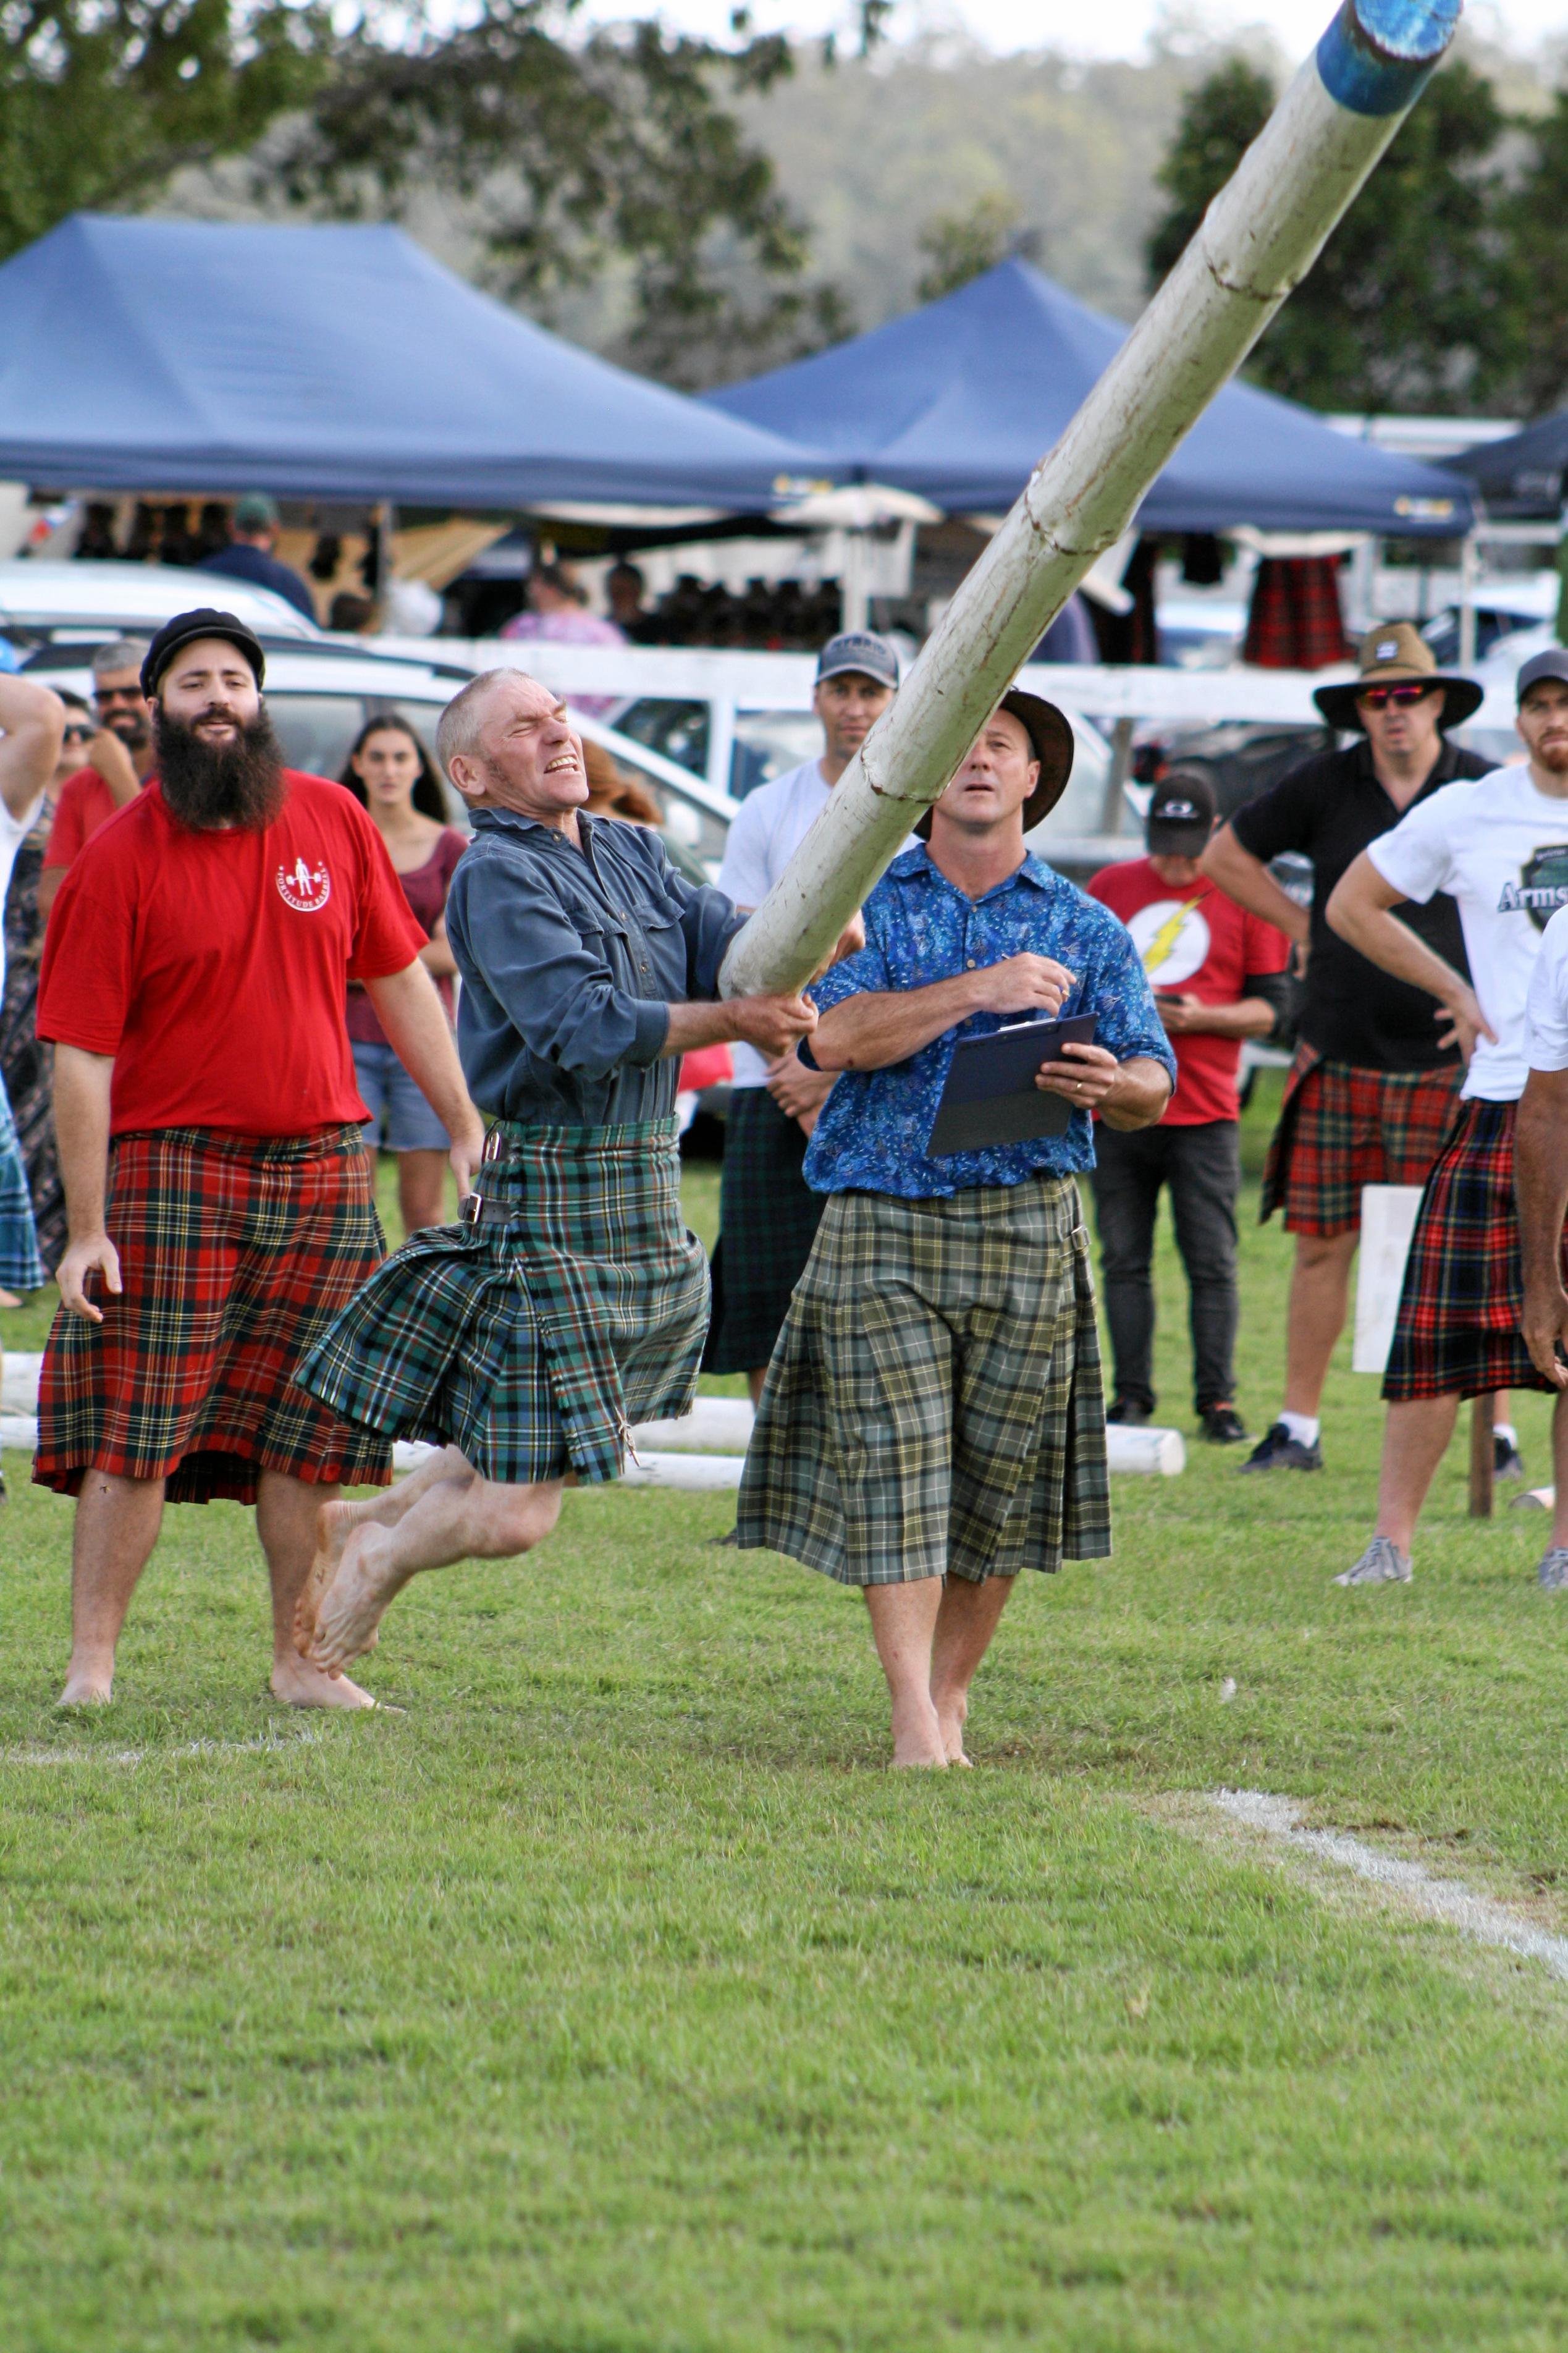 GALLERY: Maclean Highland Games | Daily Telegraph